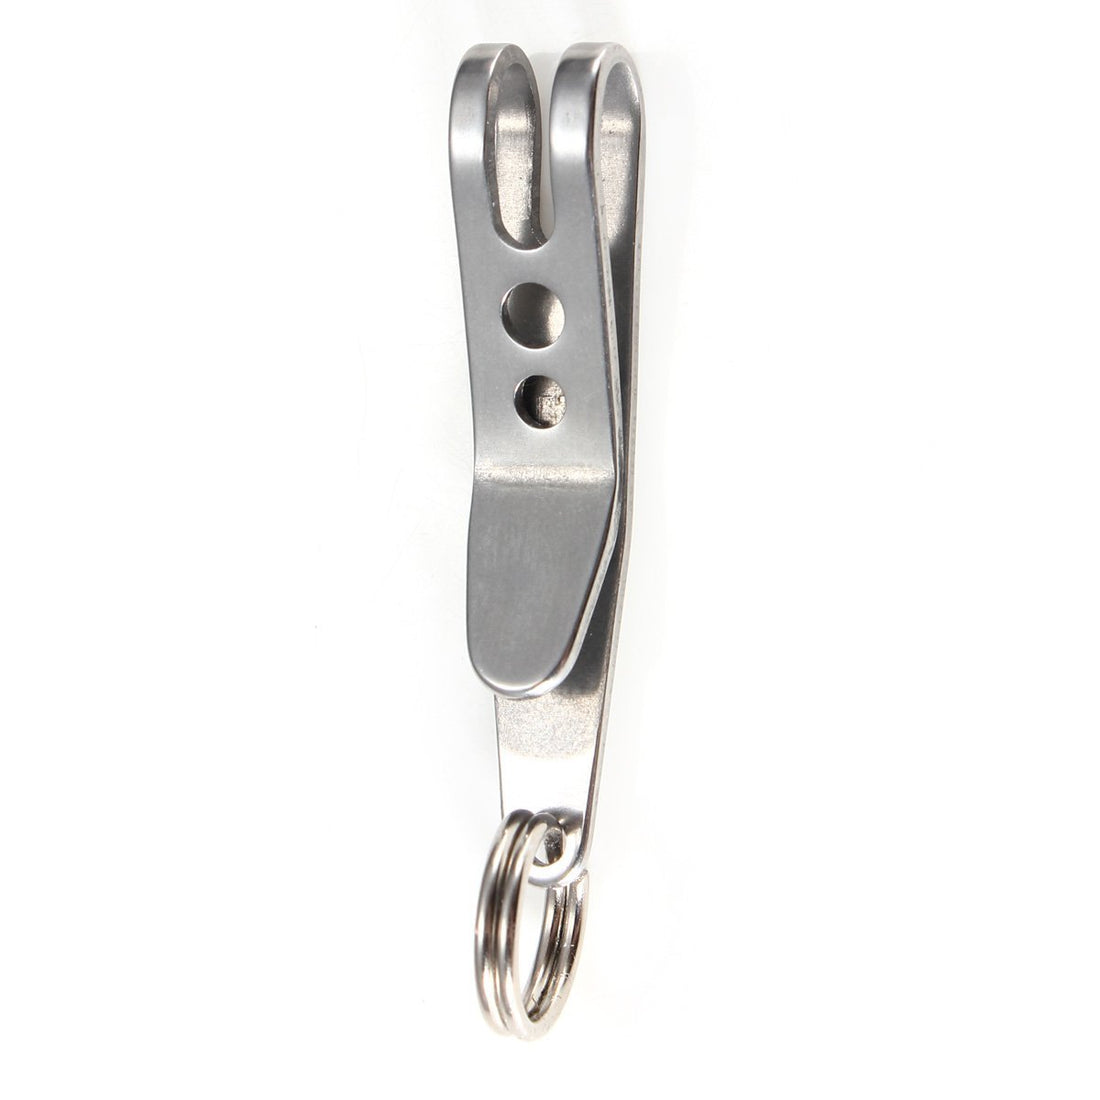 2Pcs/Lot Stainless Steel For Pocket Suspension Clip With Key Ring Carabiner-Camtoa Outdoor Store-Bargain Bait Box